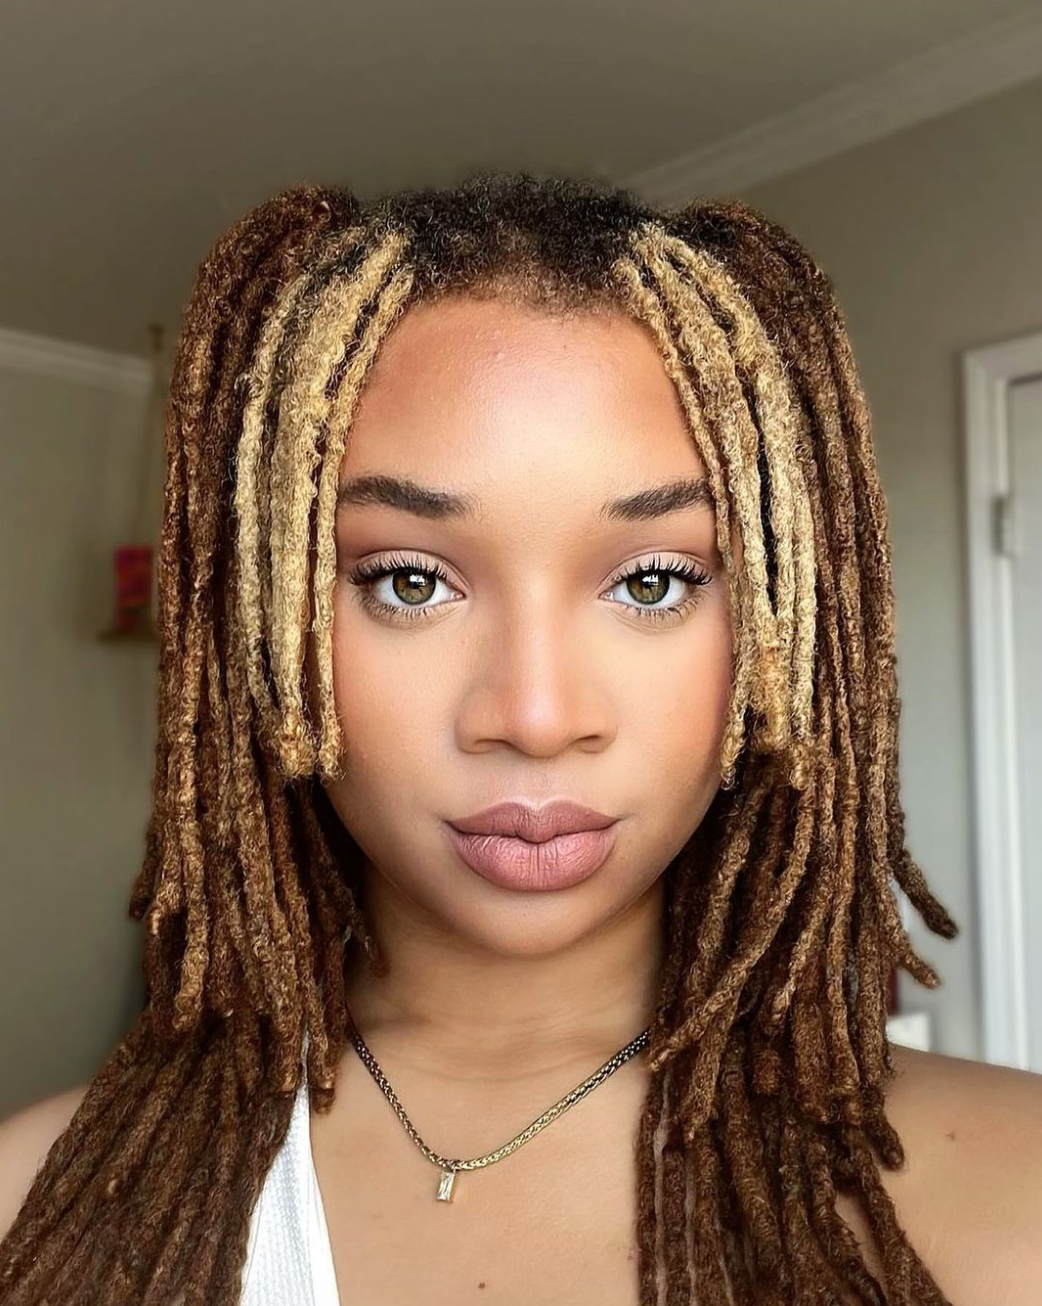 A straight on view of a woman with dreadlocs.